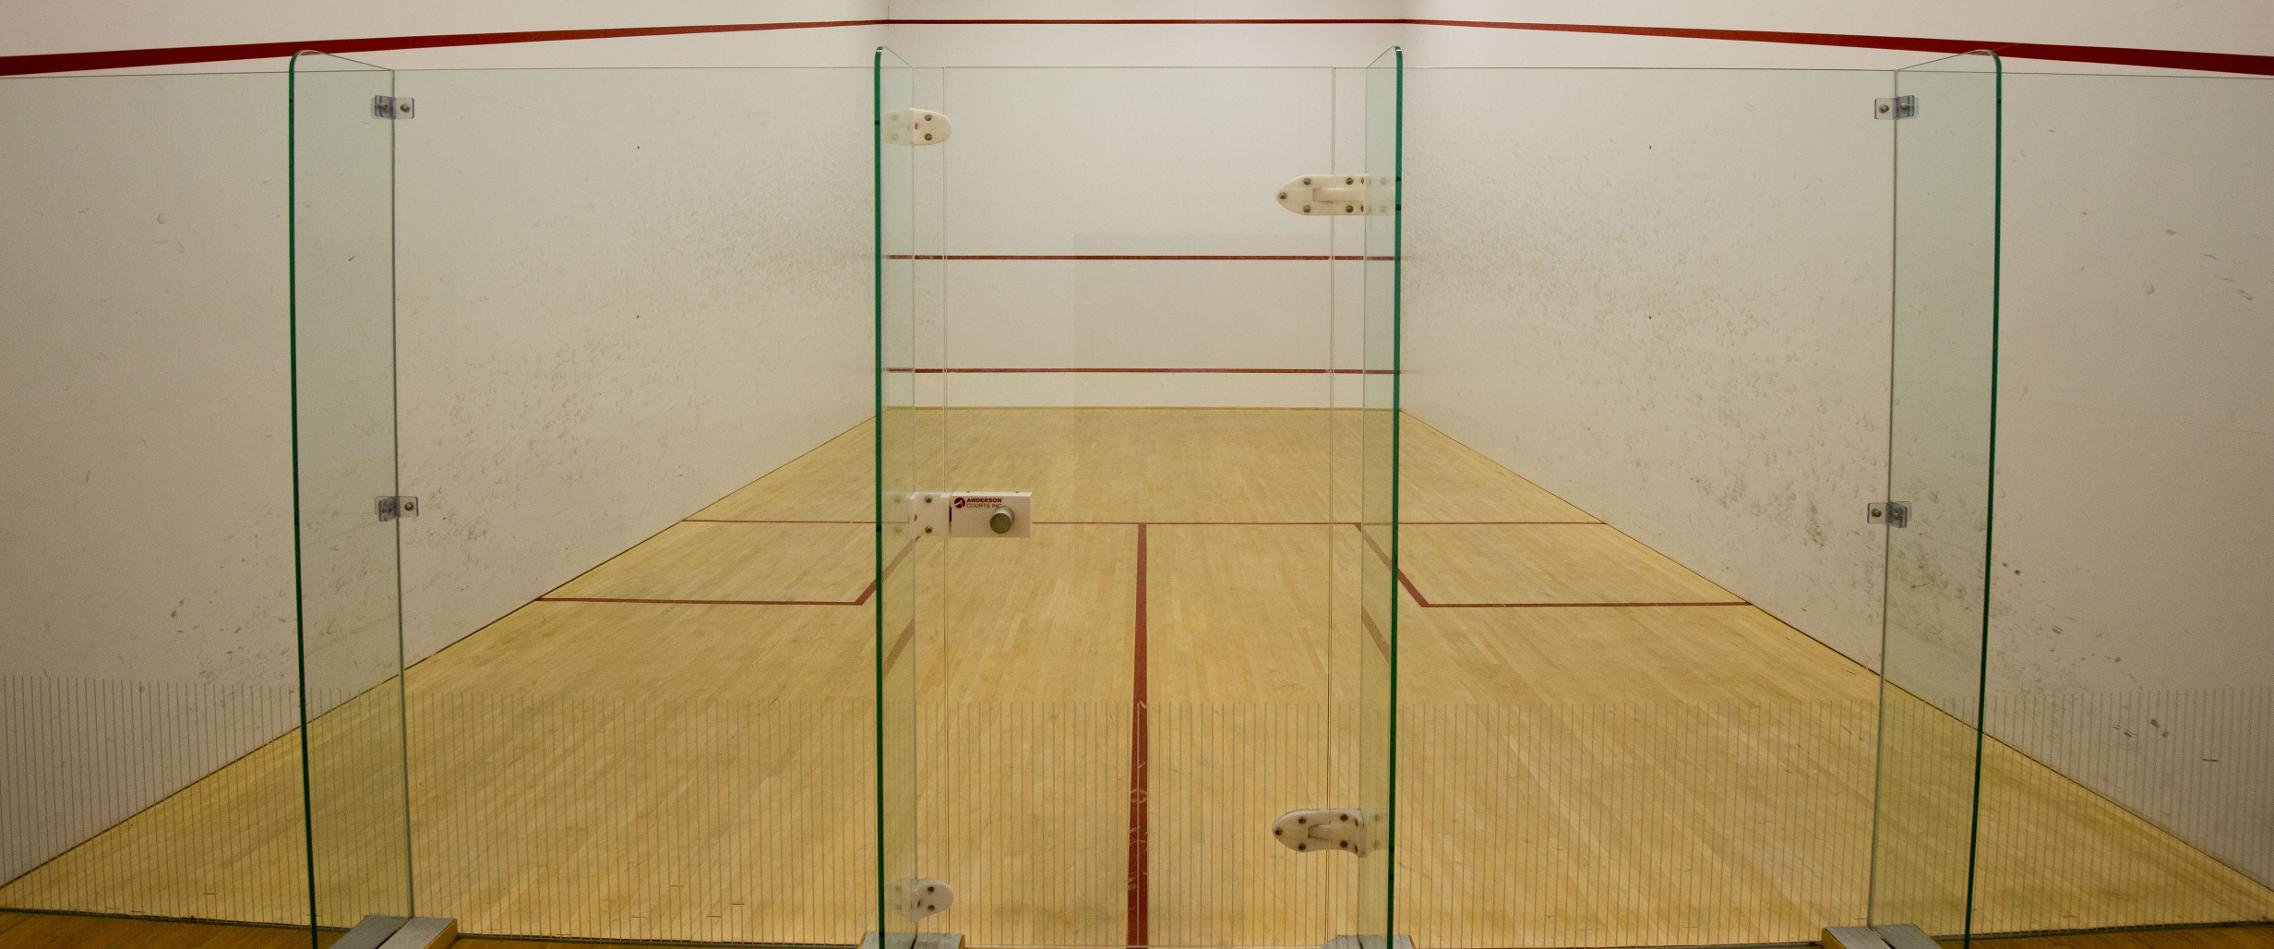 Roland Grimm Racquetball & Squash Courts